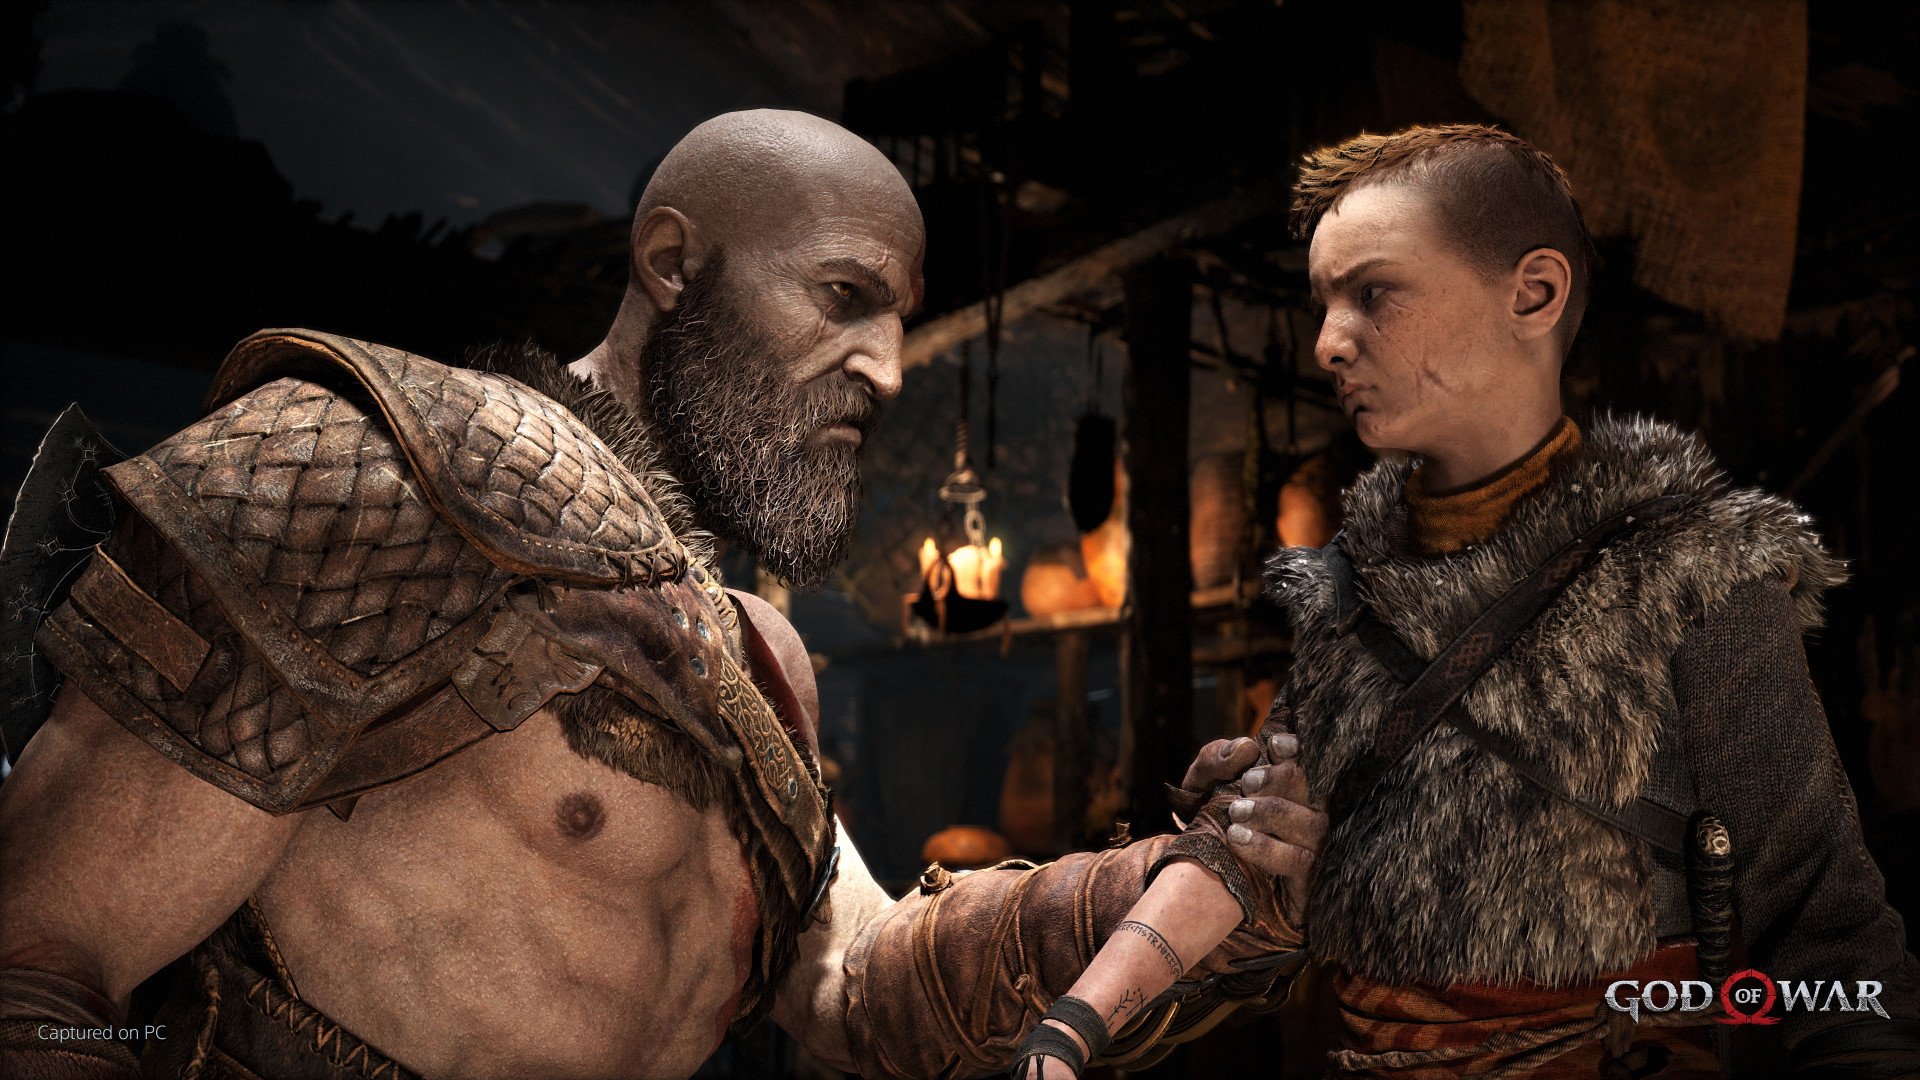 God of War PC vs PS5 graphics comparison is all about the shadows